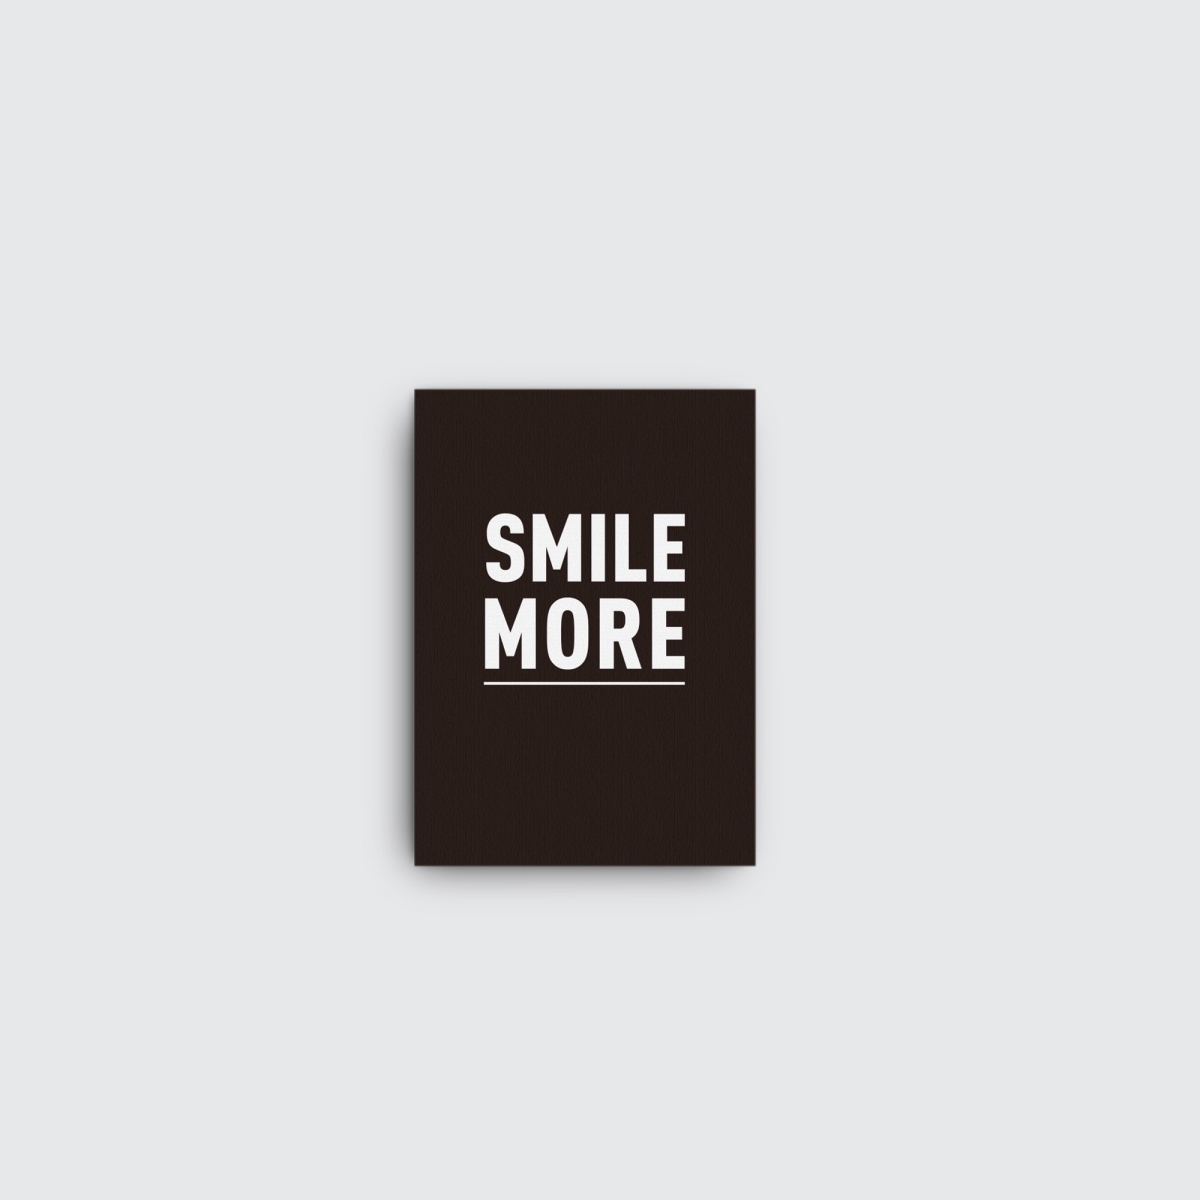 Jc00021-m Smile More 20 W X 28 H In.